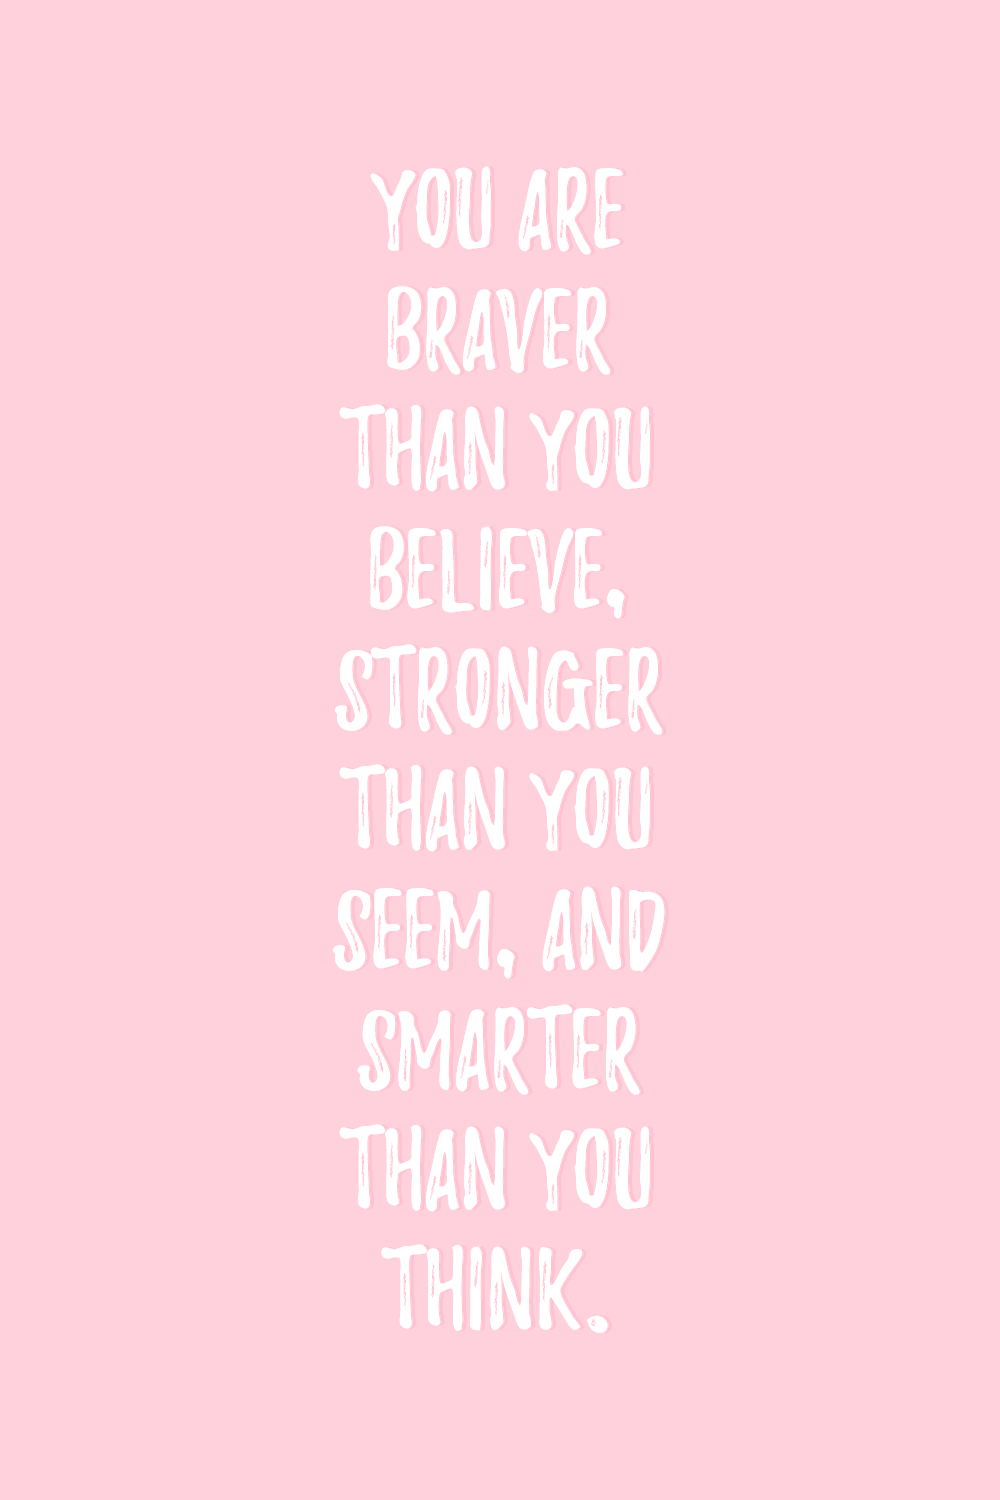 You Are Braver. Wonderful Quotes. Pink quotes, Pink